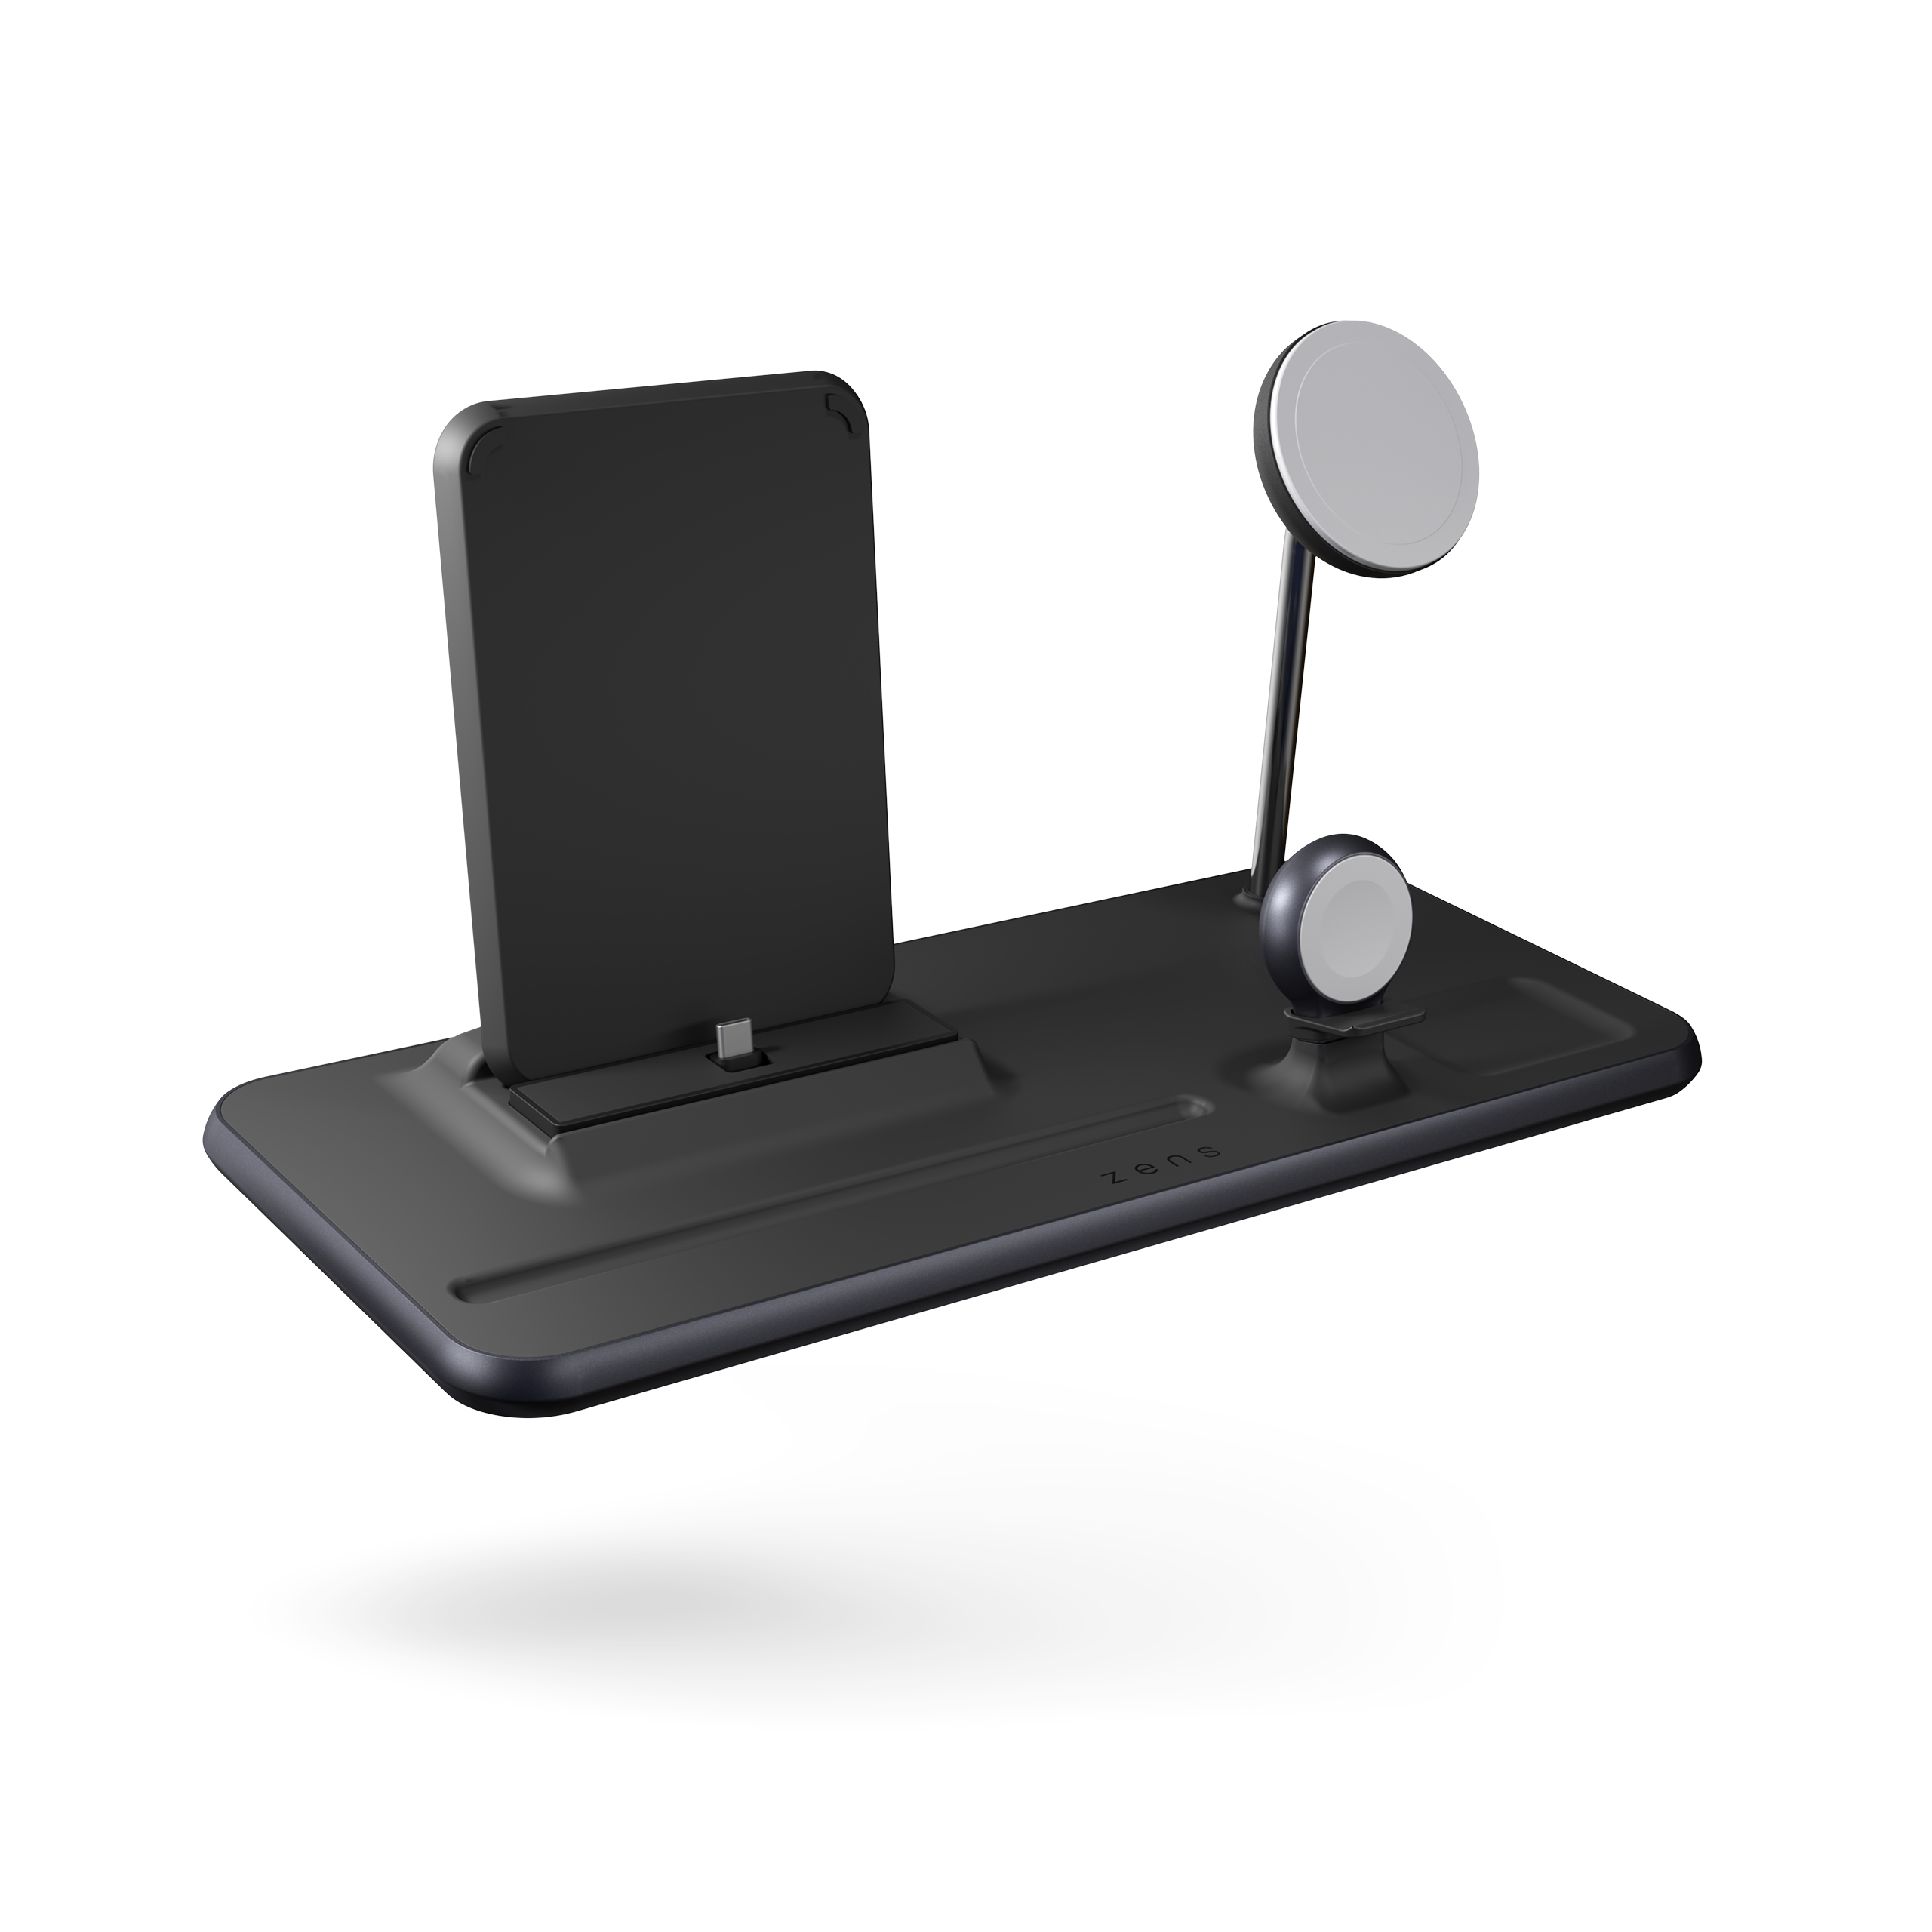 Zens 4-in-1 iPad + MagSafe wireless charger | Zens